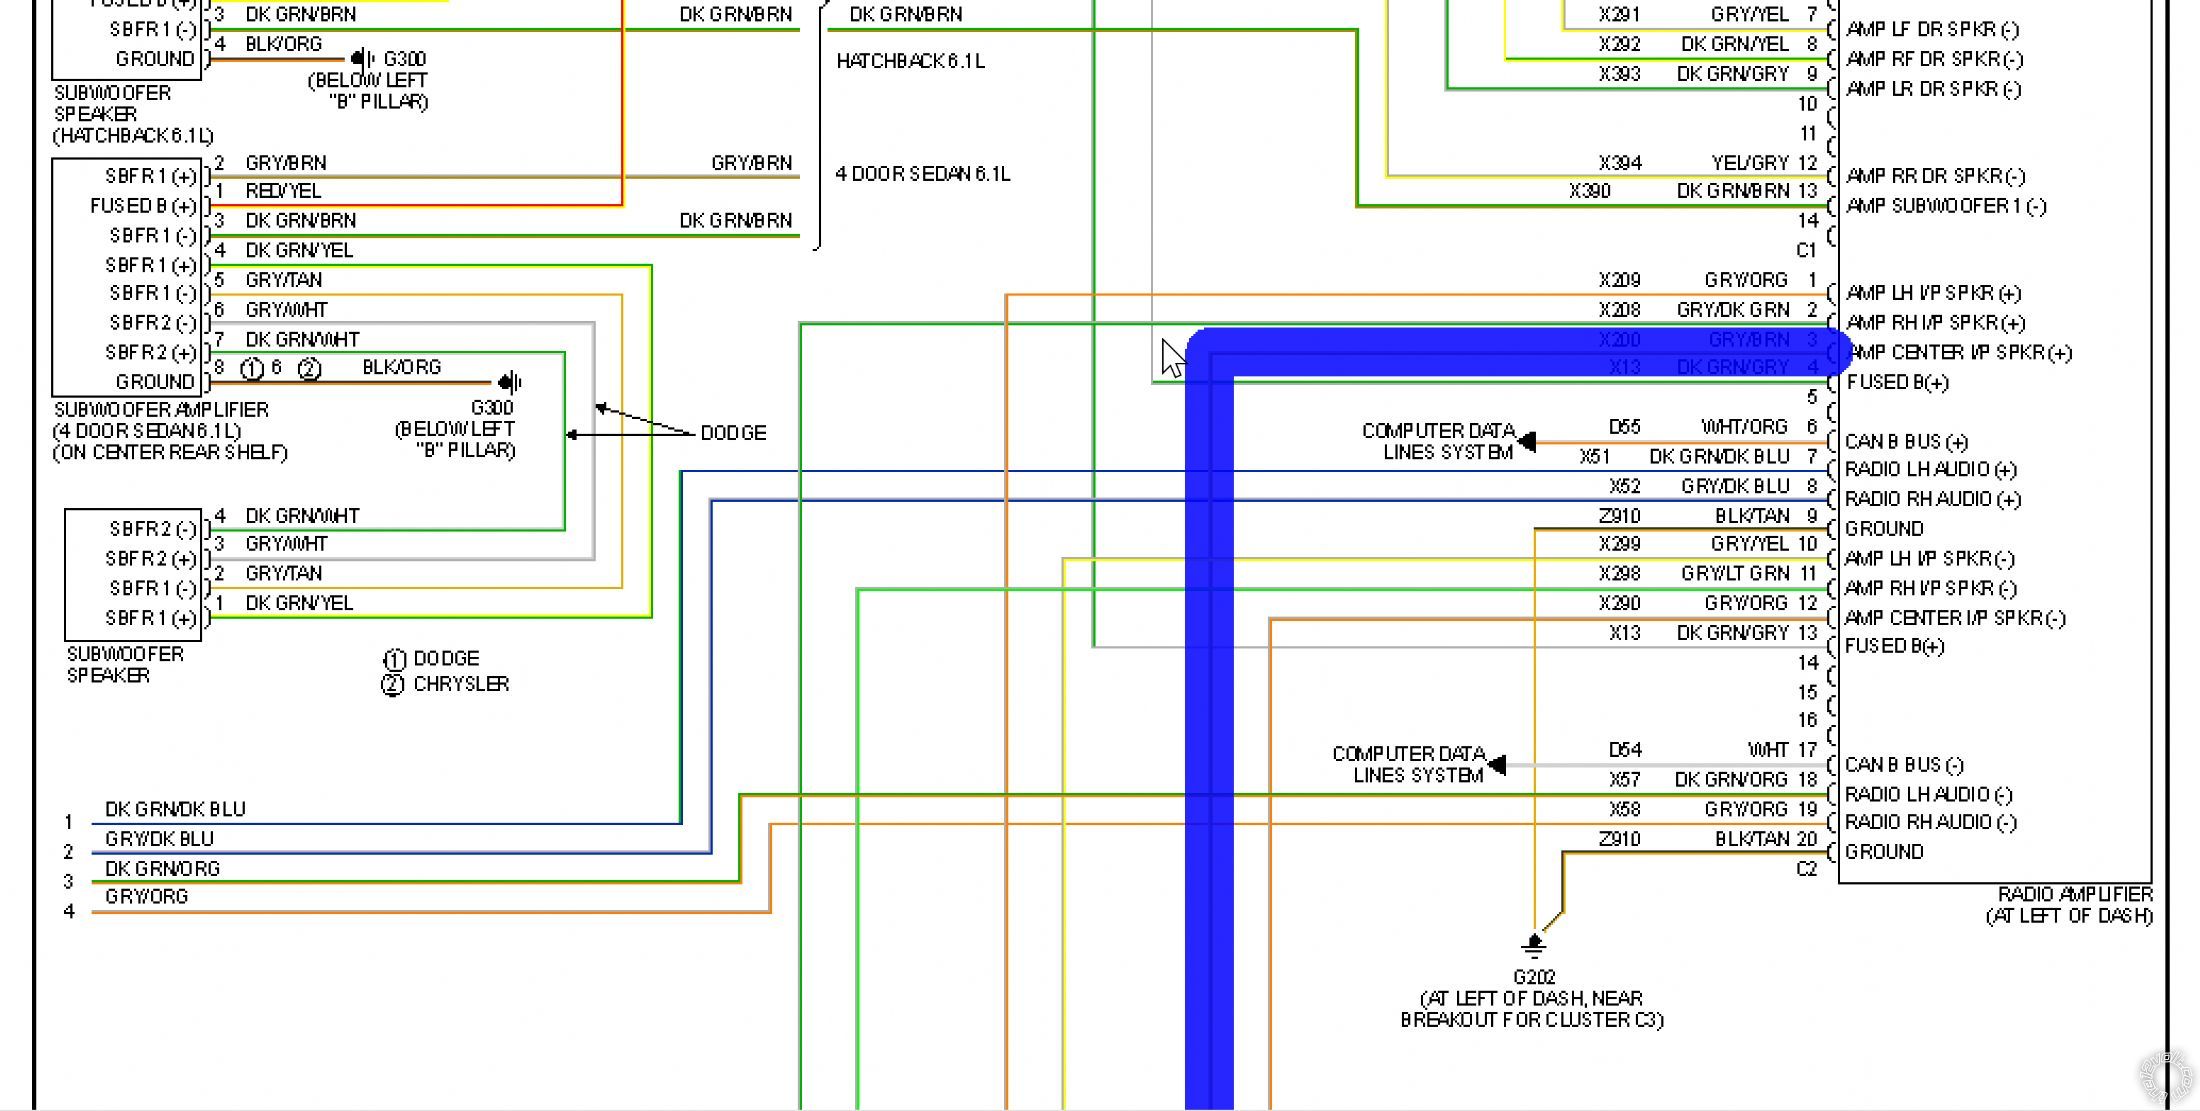 2007 Charger Wiring Diagram - Wiring Diagram and Schematic